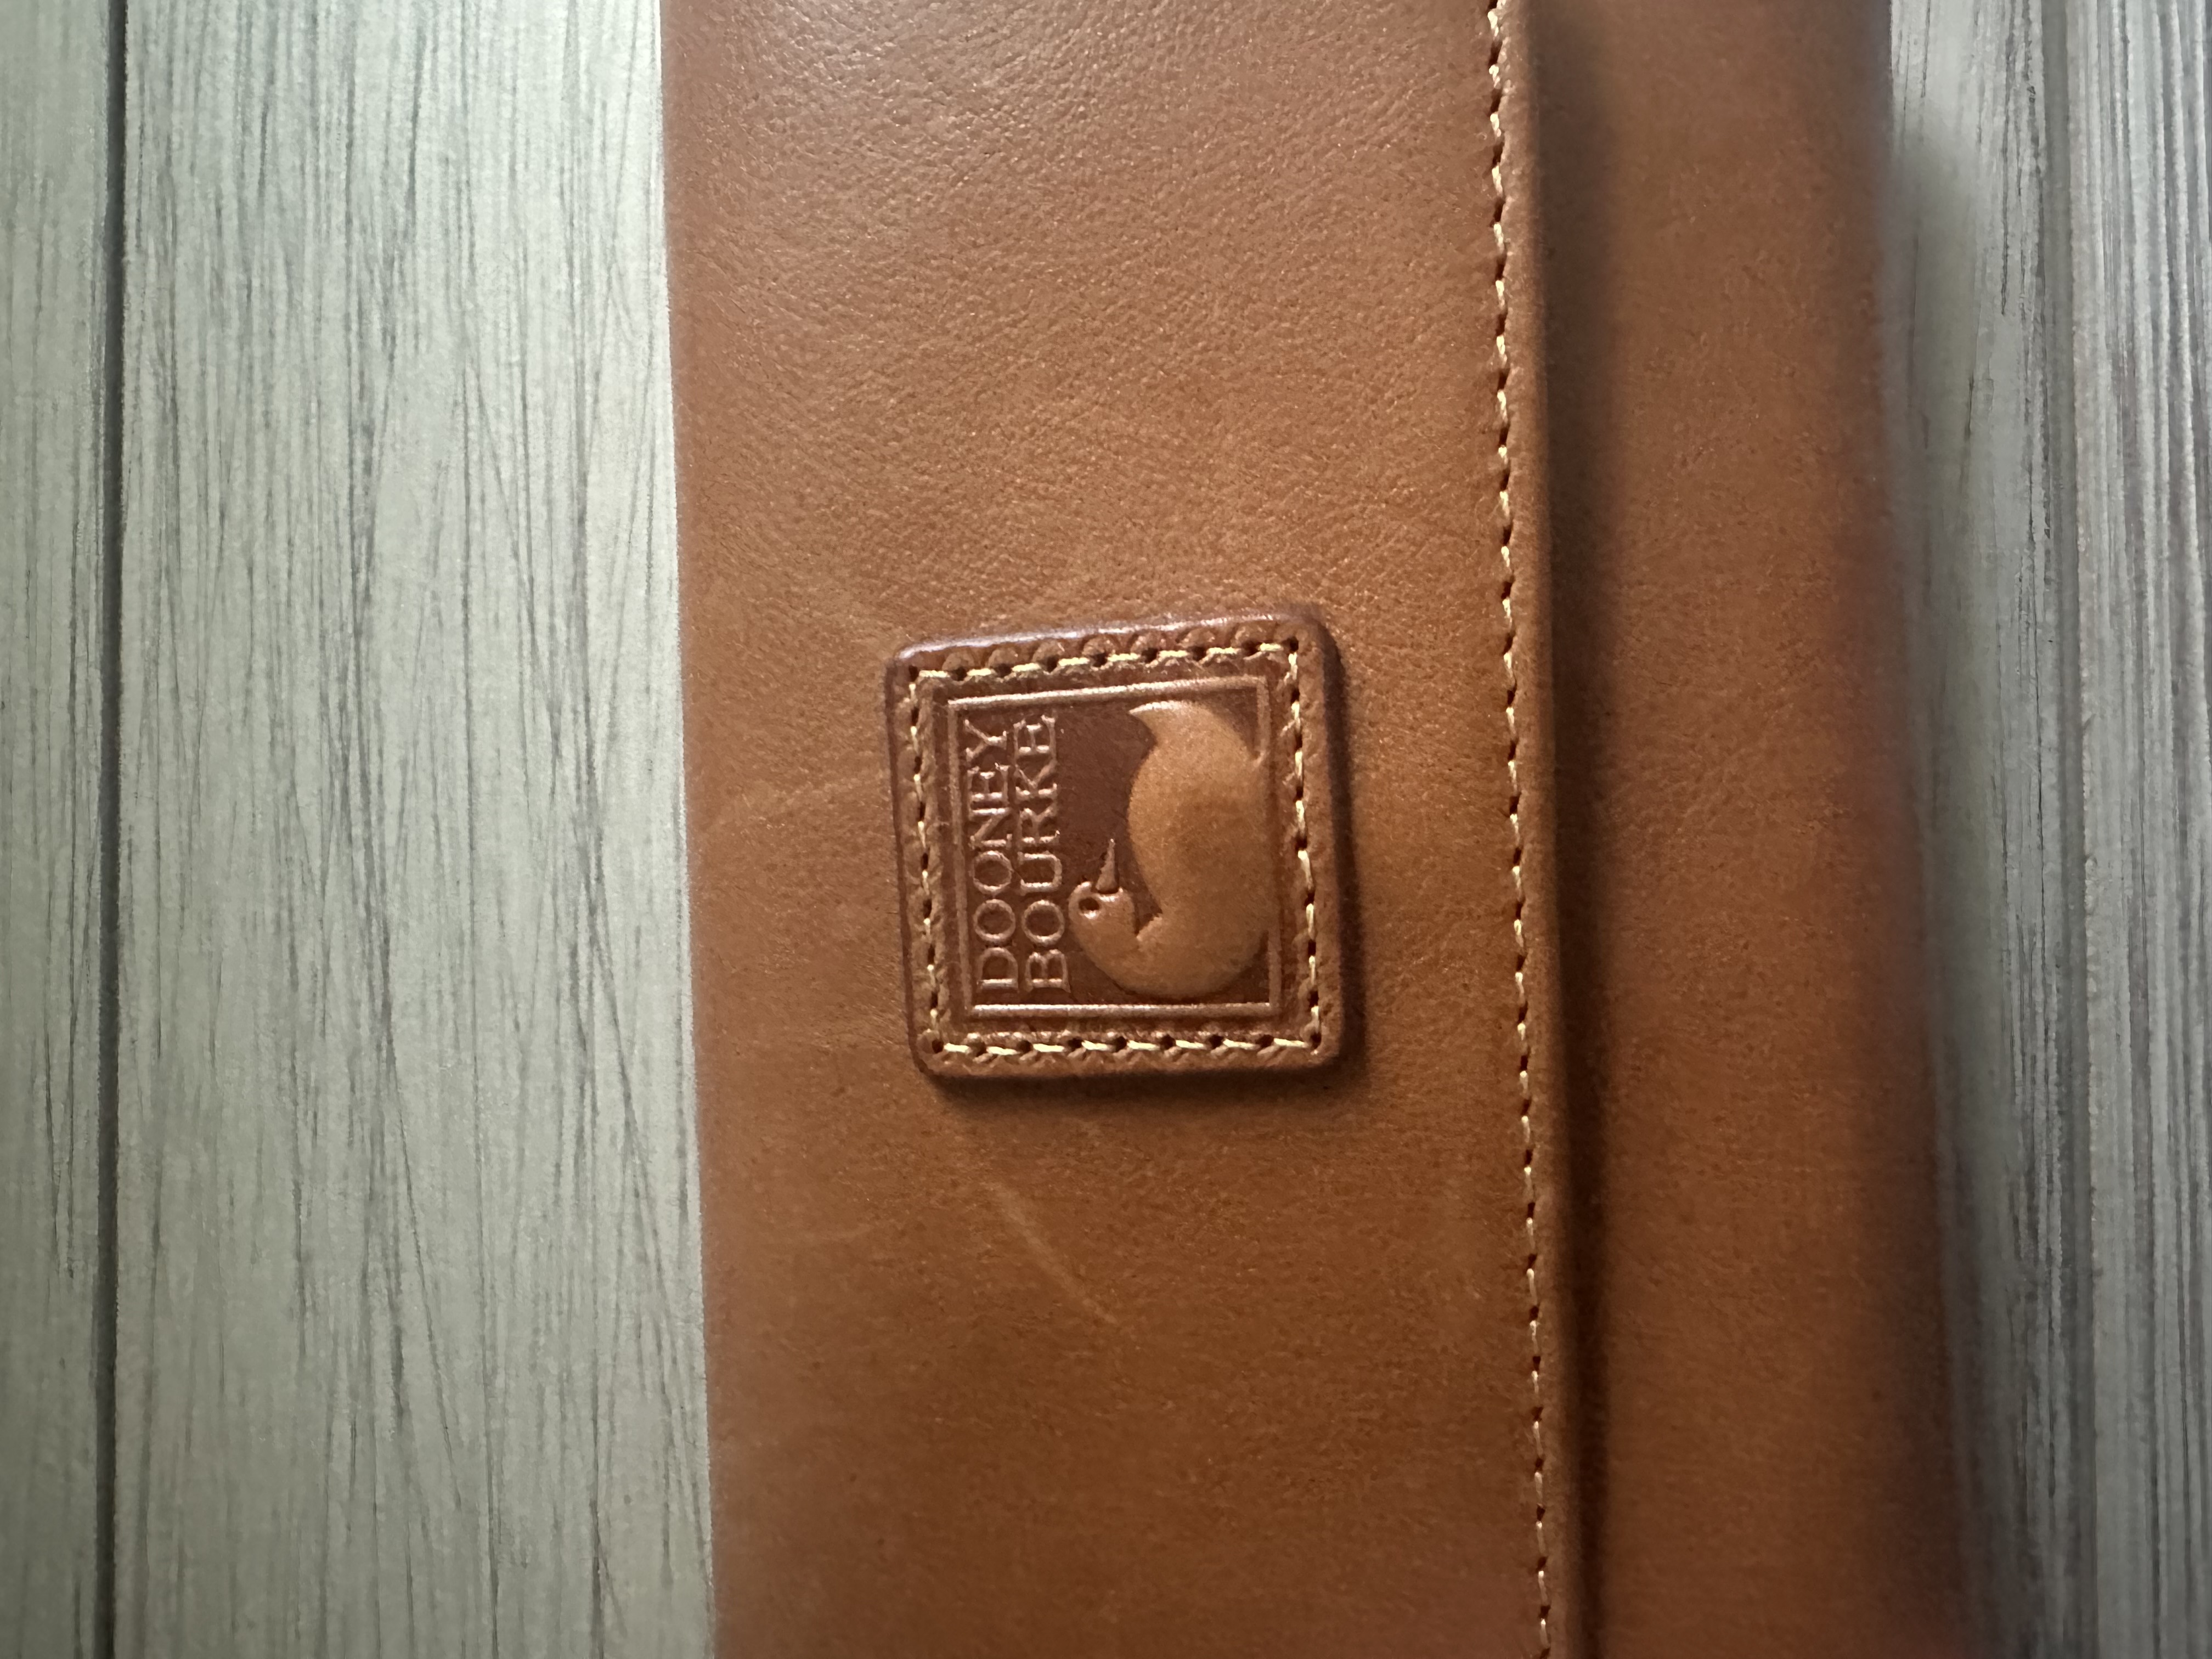 Dooney & Bourke Ambler & Sawyer Reveal, Review, Comparison and Try